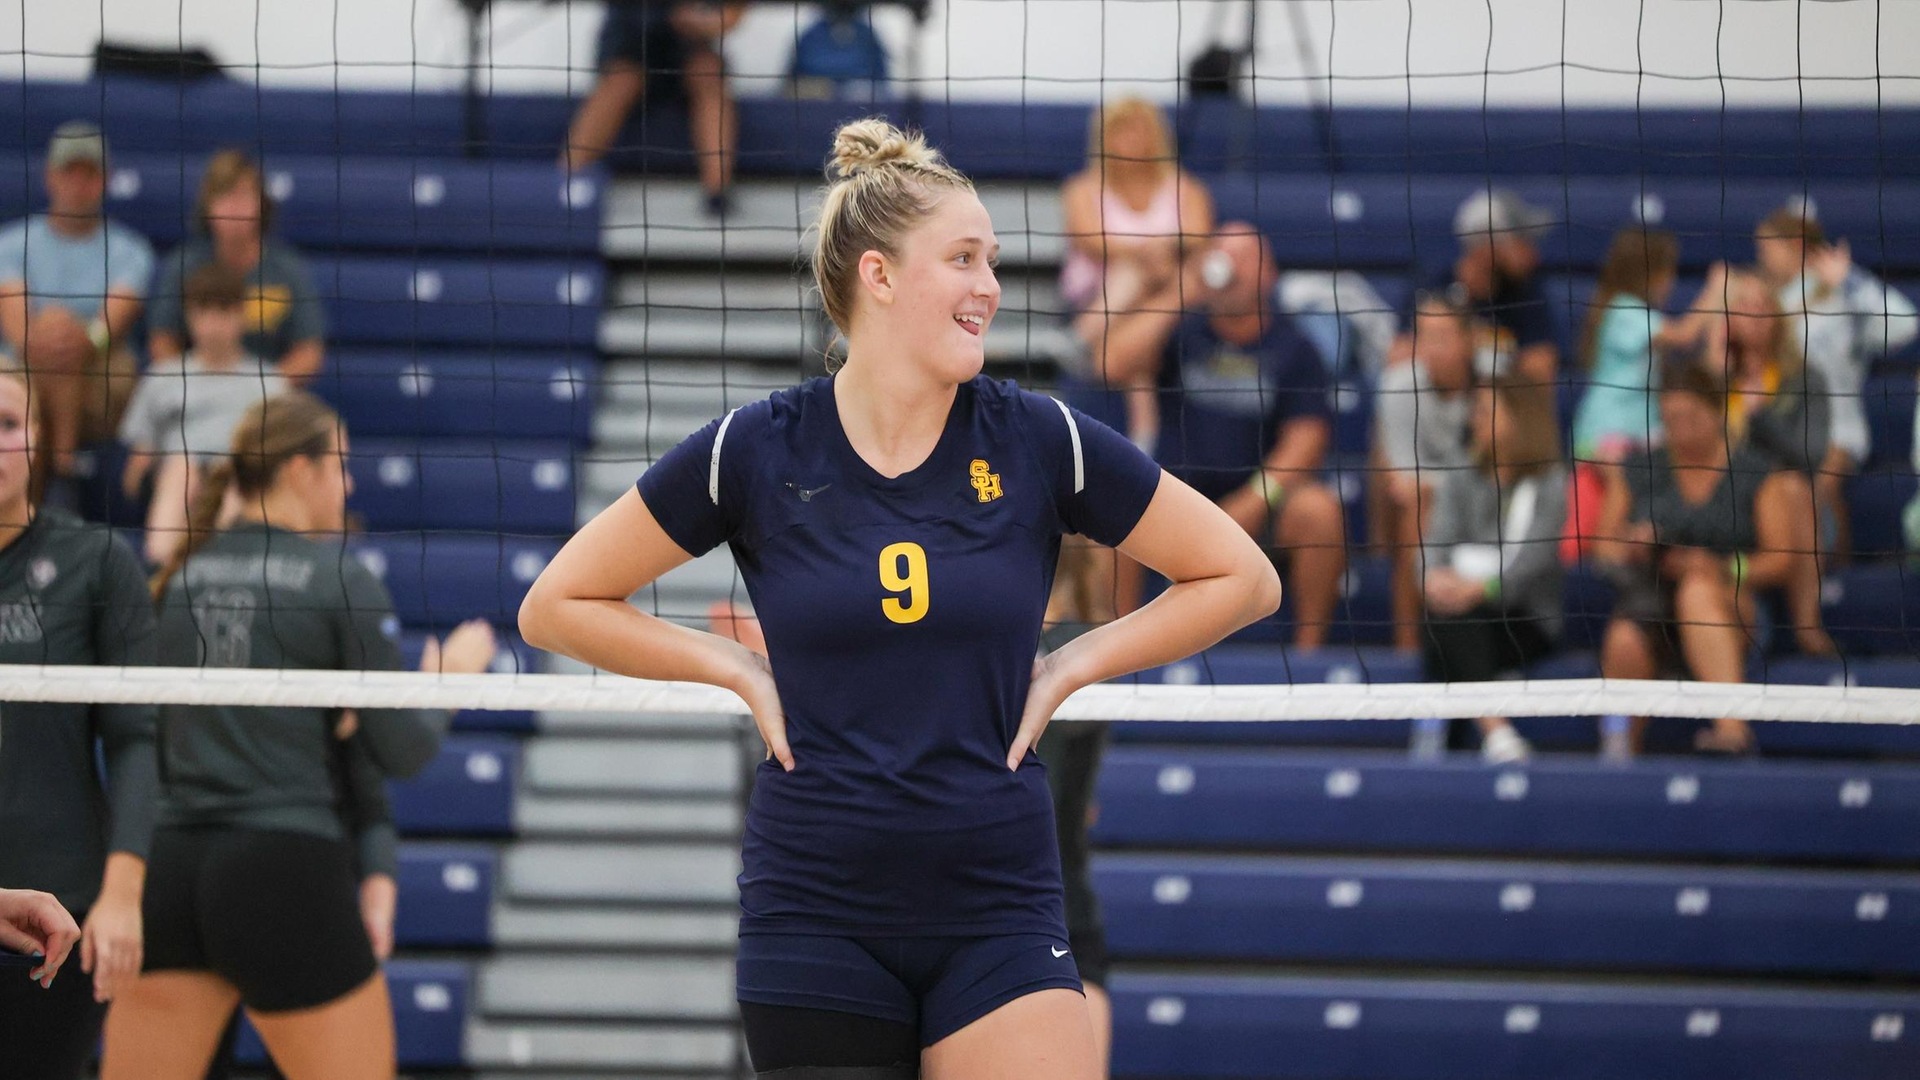 Norman Named AVCA All-Mideast Region Honorable Mention